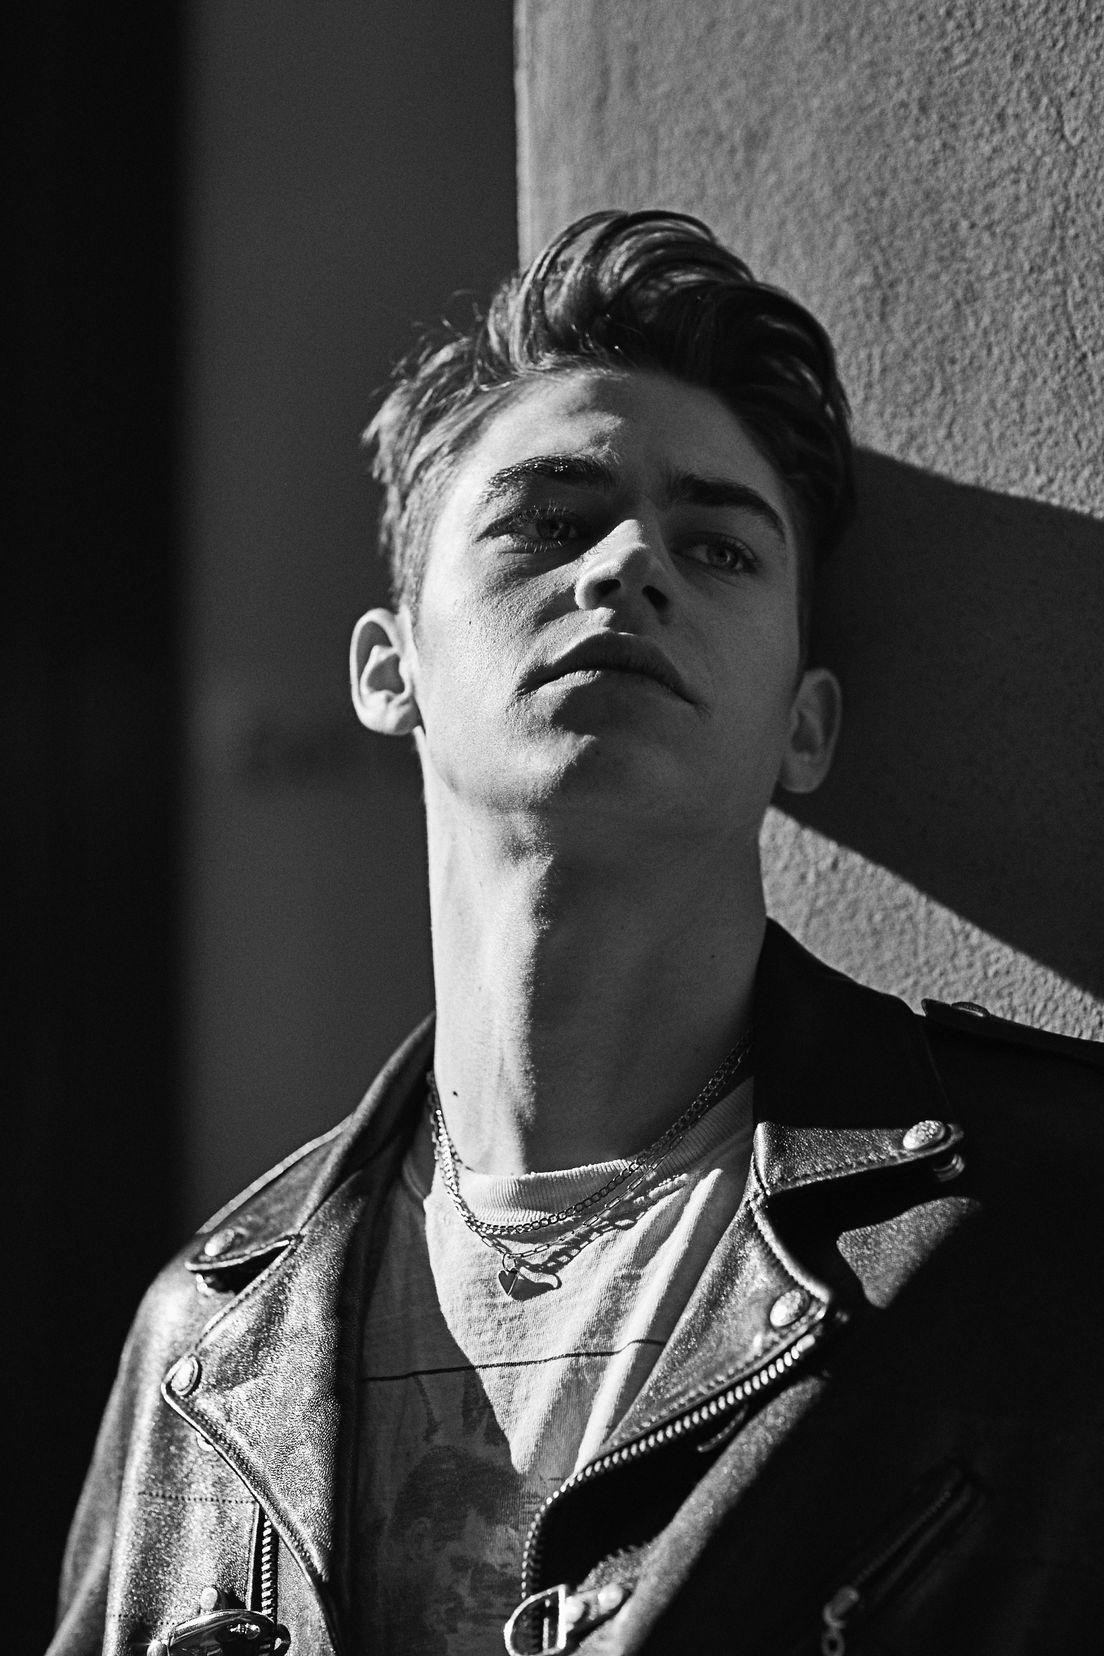 Hero Fiennes Tiffin Is Ready to Shed His Harry Potter Origin